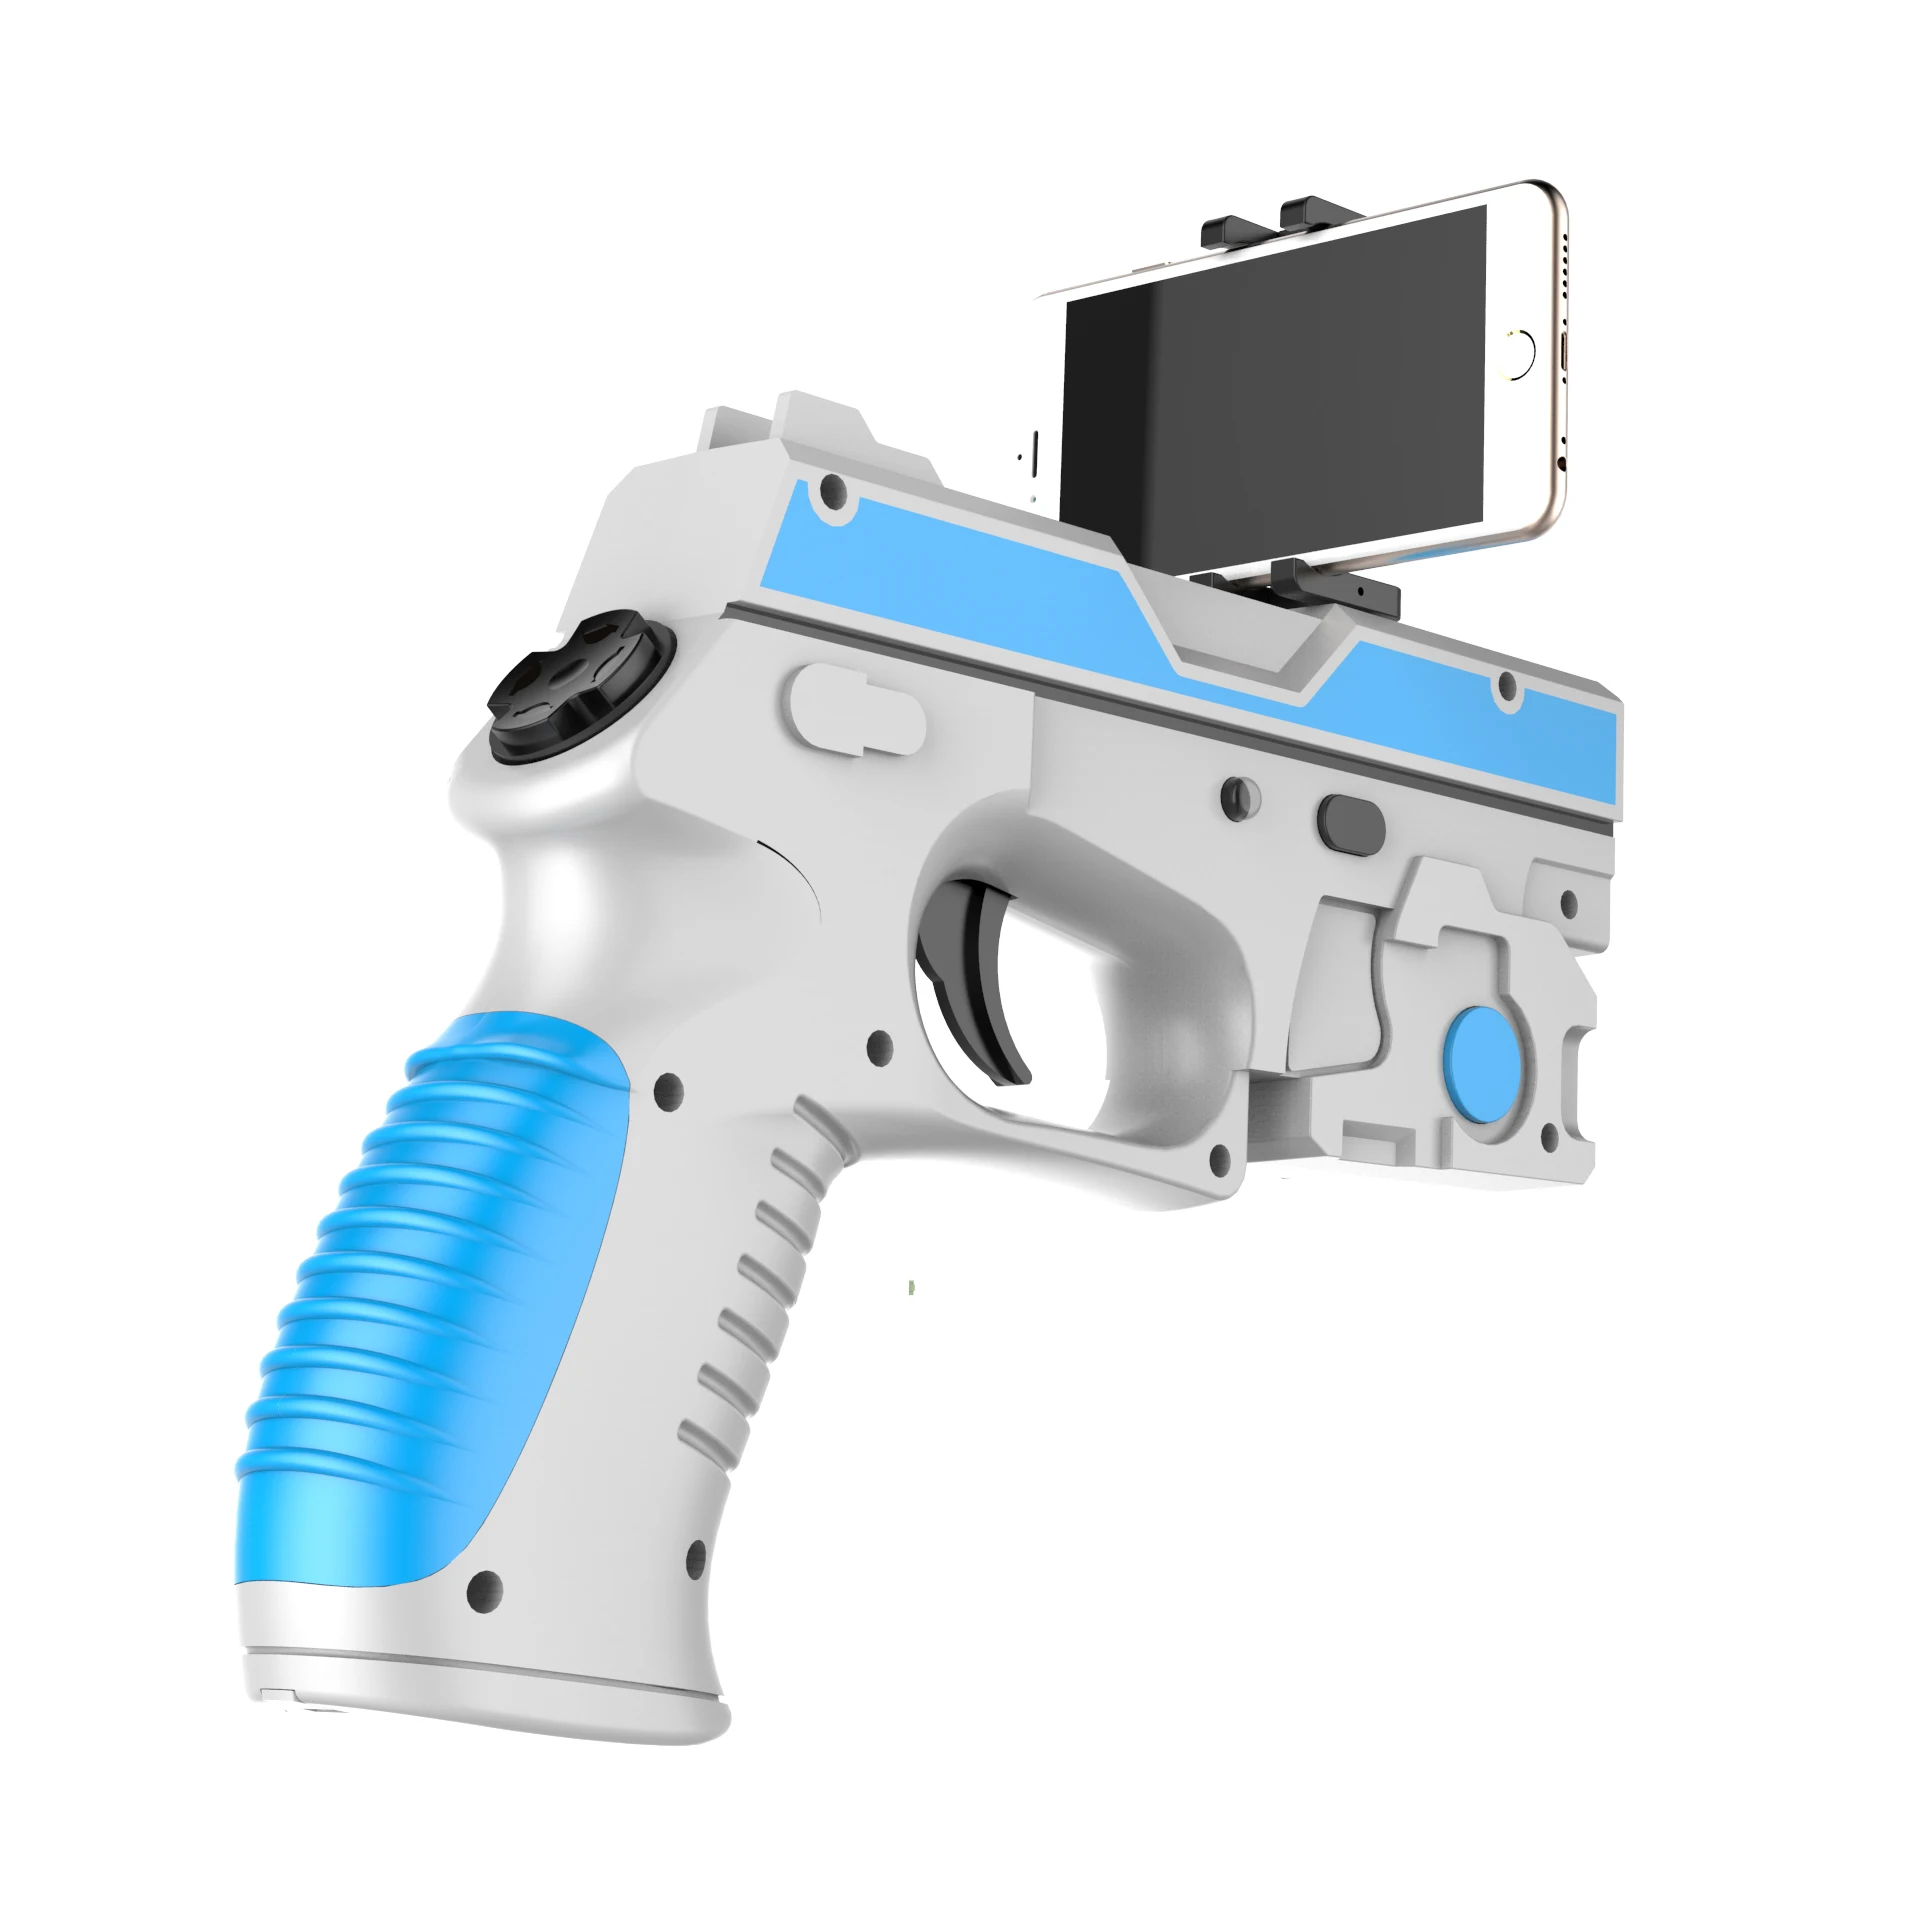 
Kids Toys AR VR Toy Gun with Cell Phone Stand Holder for Multiplayer Battle Remote Sensing Game 